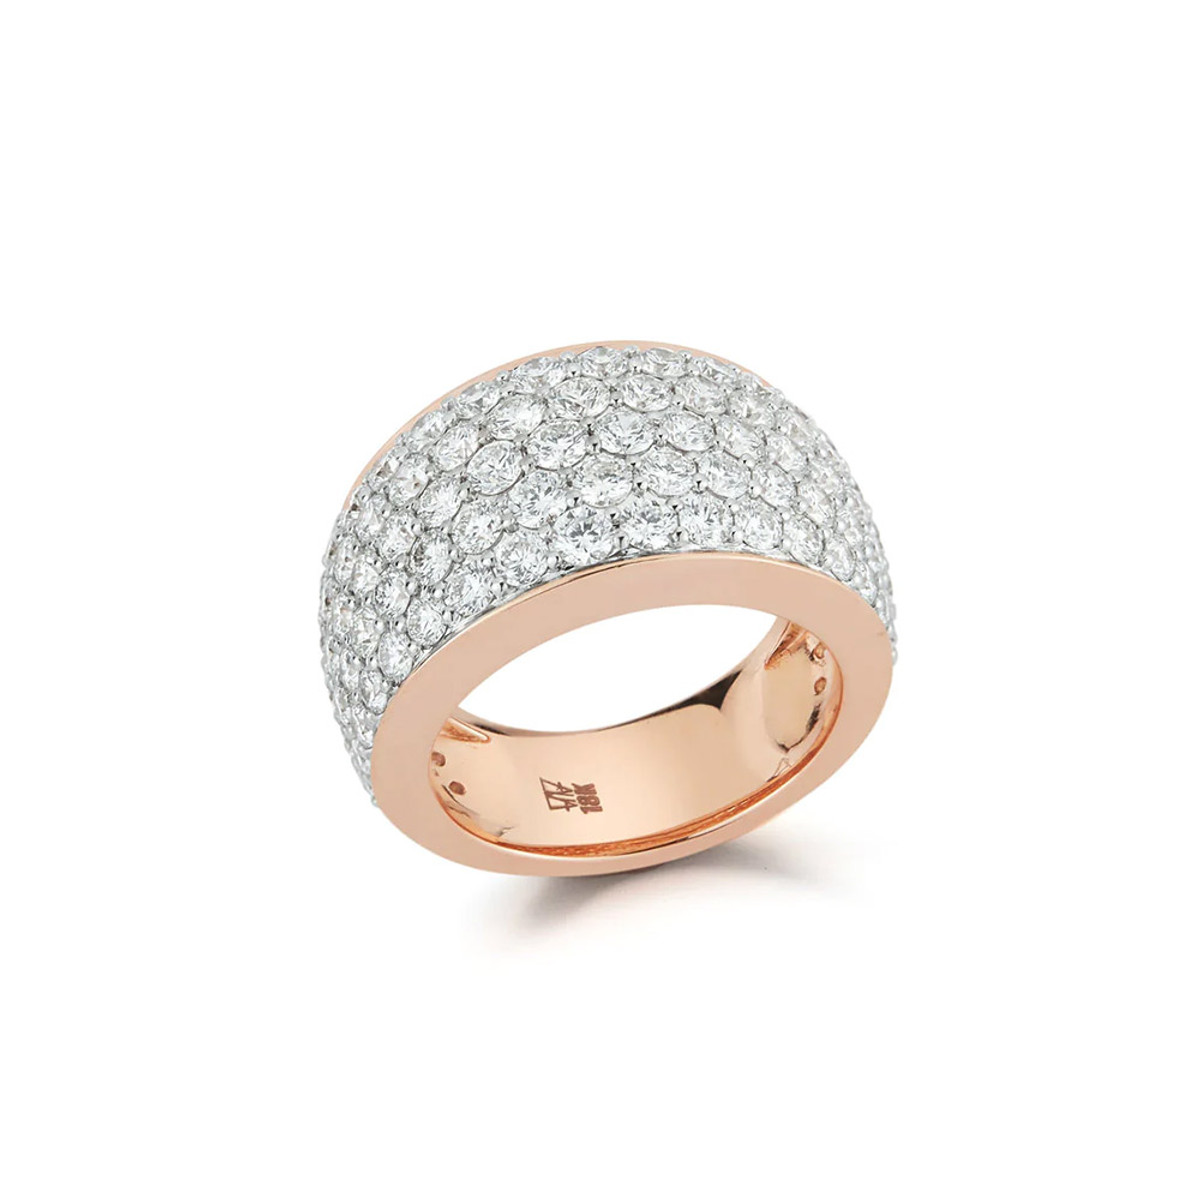 Walters Faith Lytton 18K Rose Gold all Pave Diamond Bombe Ring-47166 Product Image